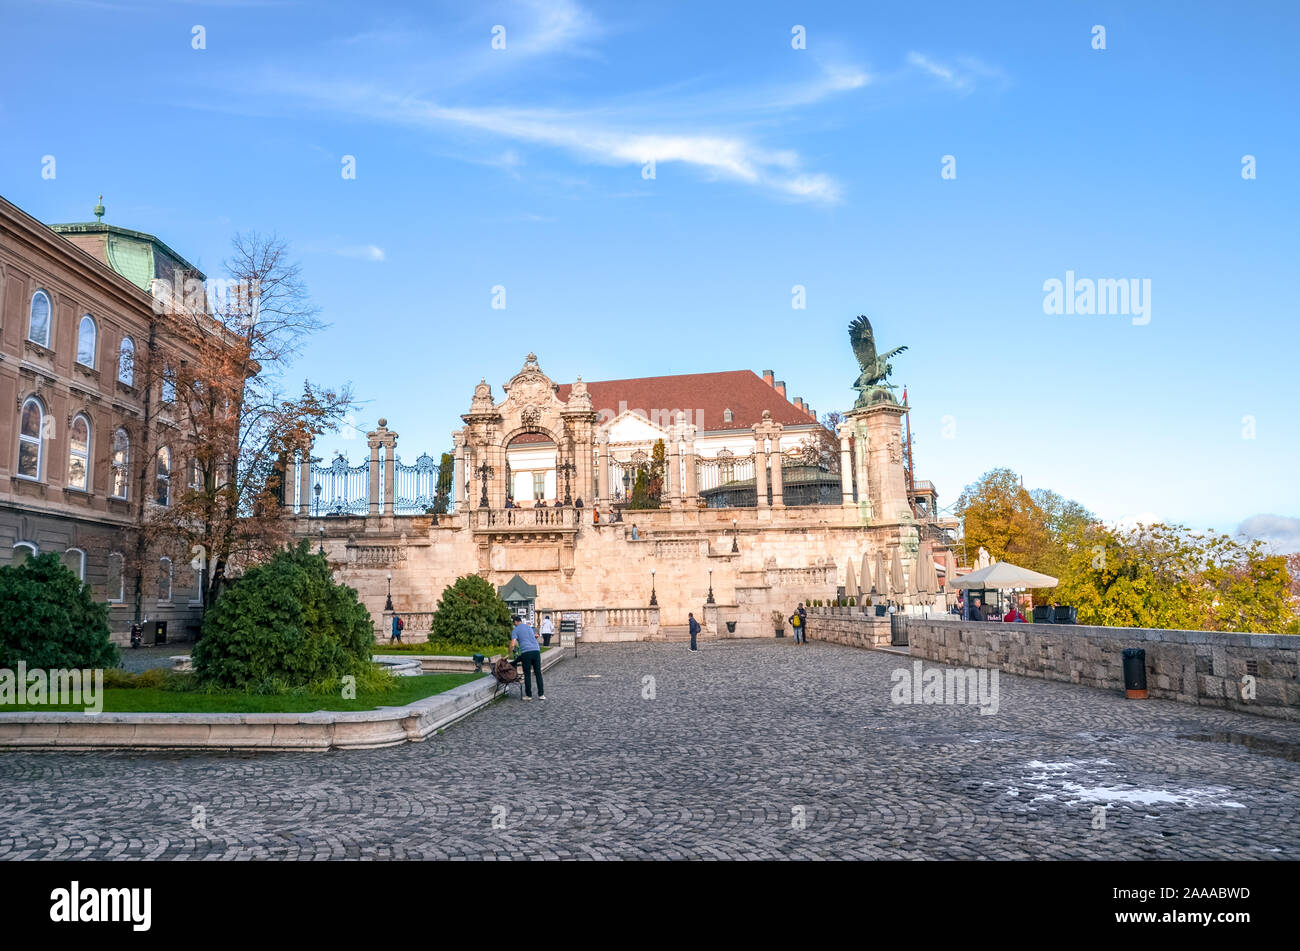 Budapest, Hungary - Nov 6, 2019: Historical courtyard of the Buda Castle. Statue of the mythological bird Turul and historical staircase in the background. Tourist landmark, people on the square. Stock Photo